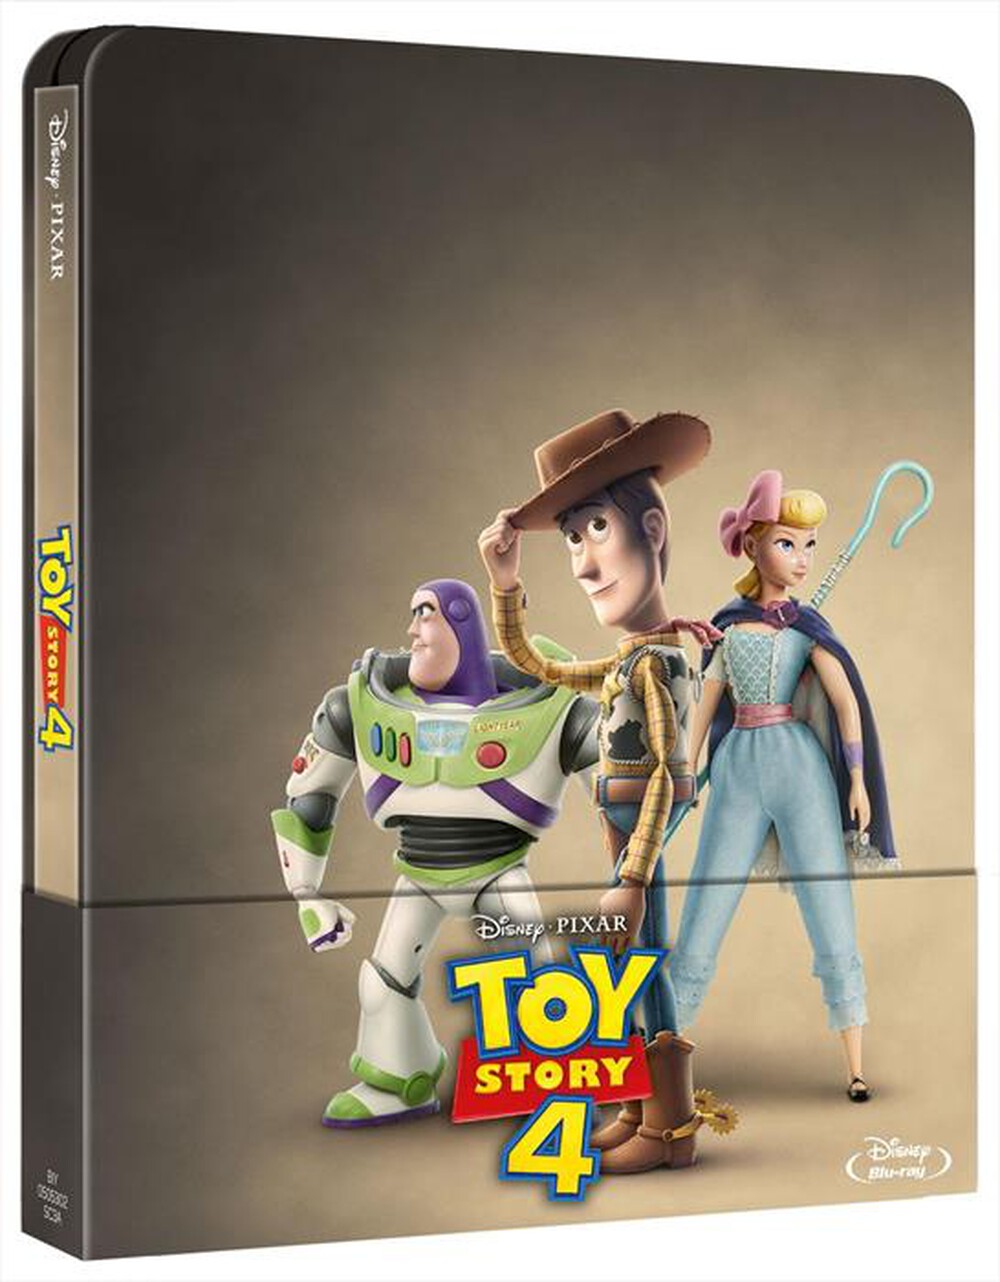 "EAGLE PICTURES - Toy Story 4 (Steelbook)"